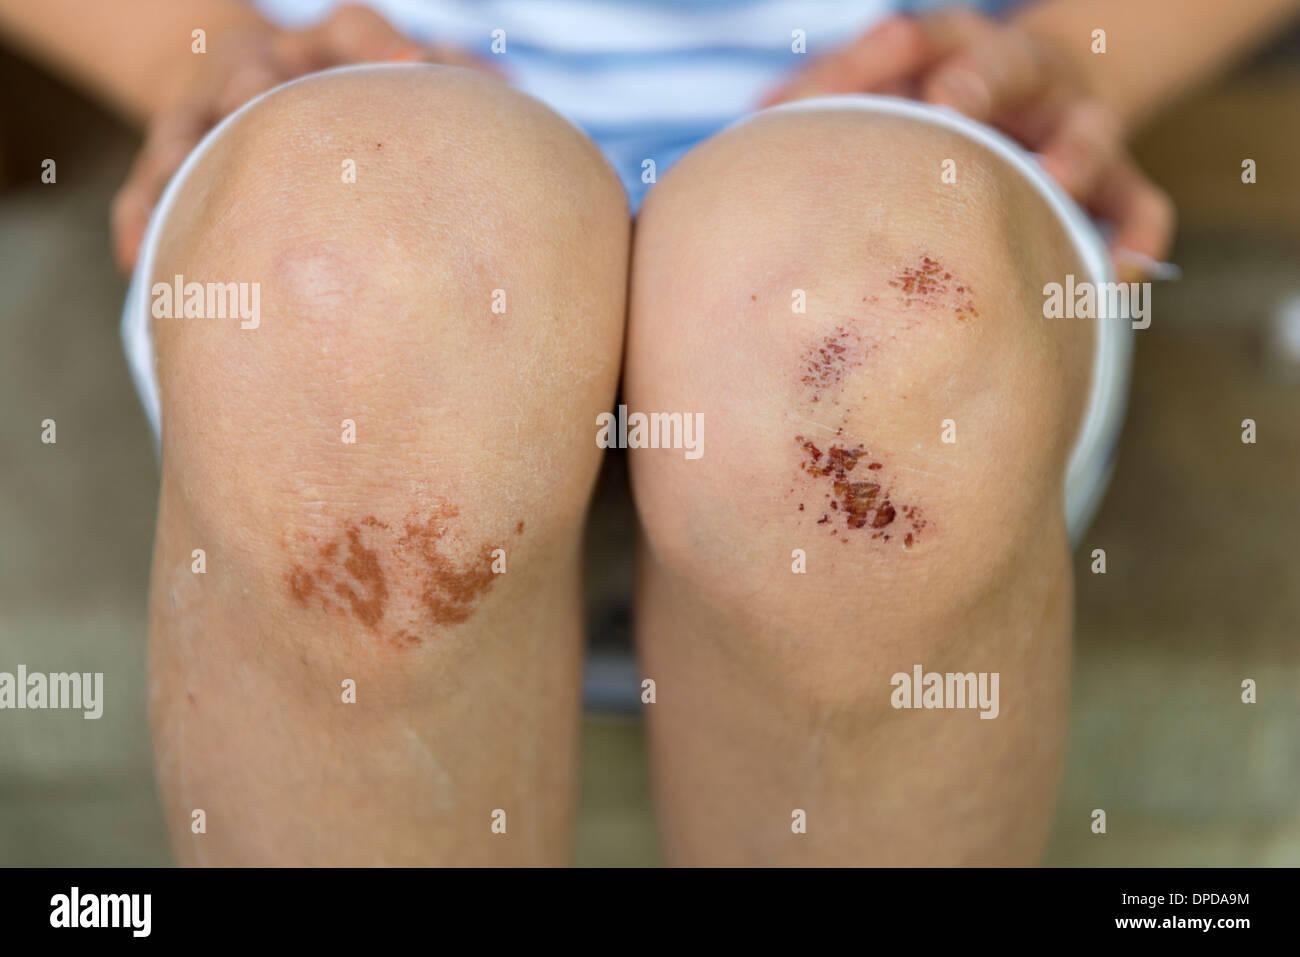 Graze at knees of a girl Stock Photo